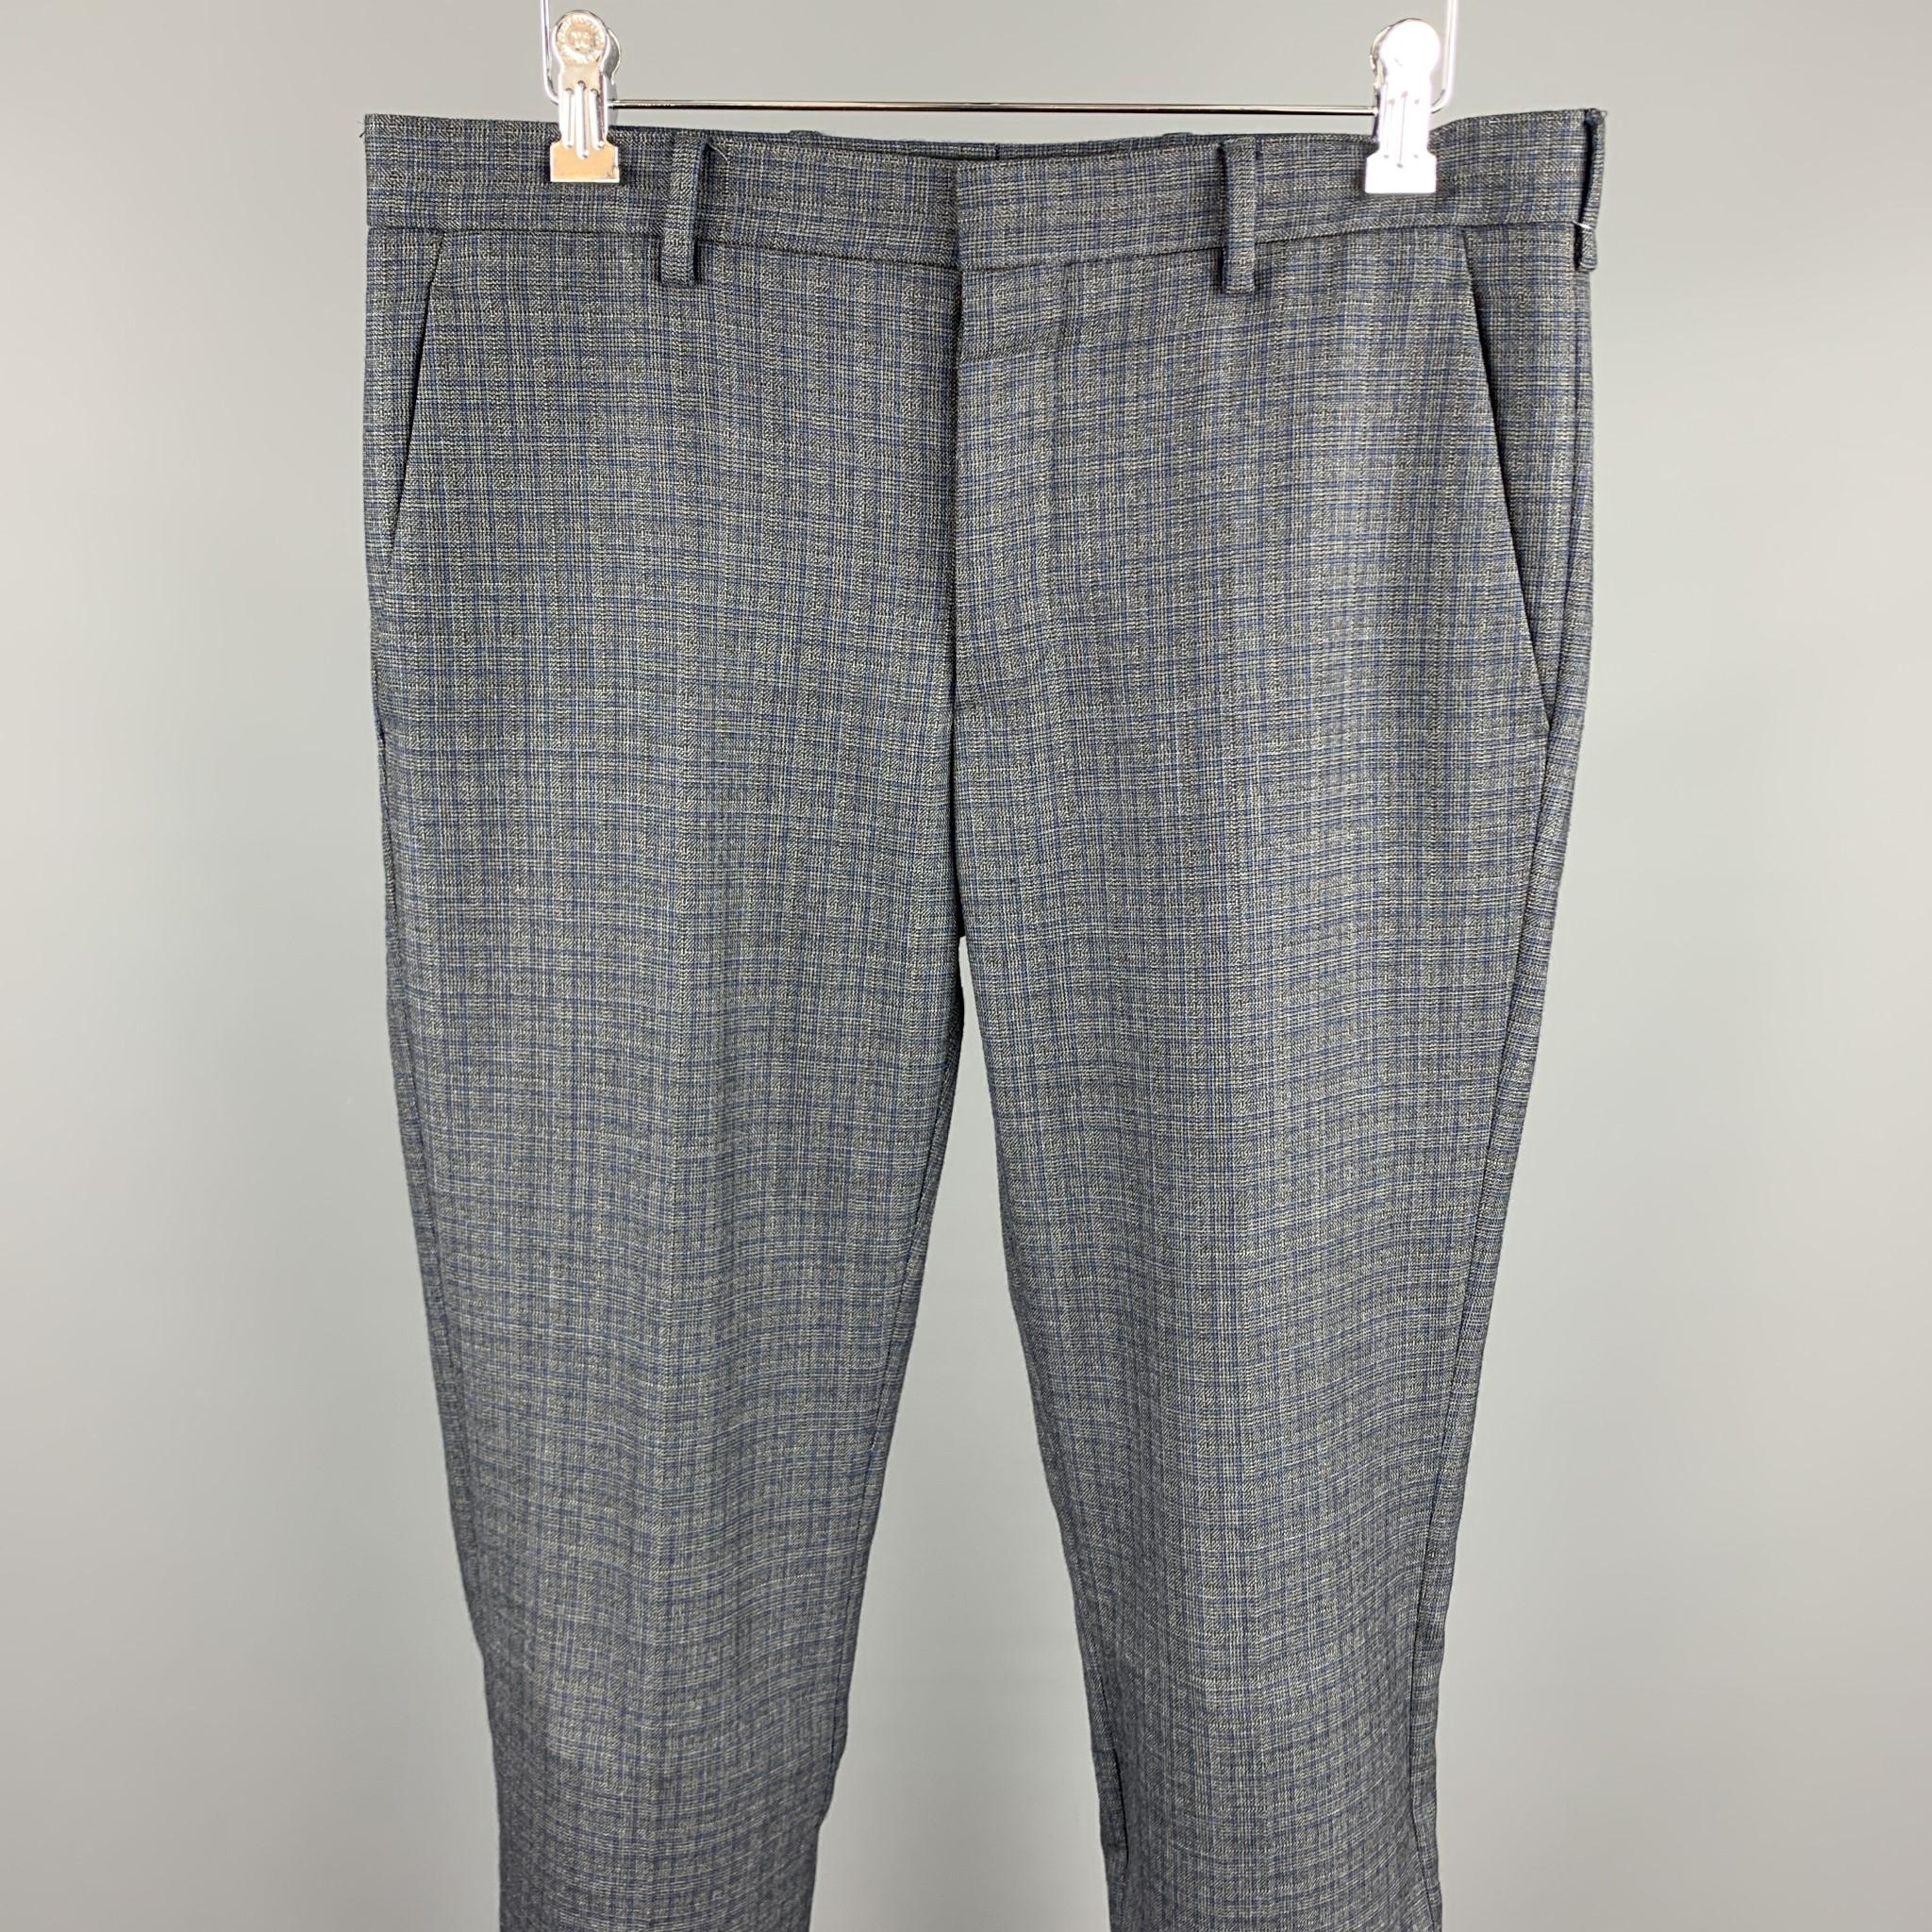 PRADA dress pants comes in a gray wool featuring a flat front and a button fly closure. Made in Italy.

Excellent Pre-Owned Condition.
Marked: IT 46

Measurements:

Waist: 32 in. 
Rise: 8.5 in. 
Inseam: 34 in. 